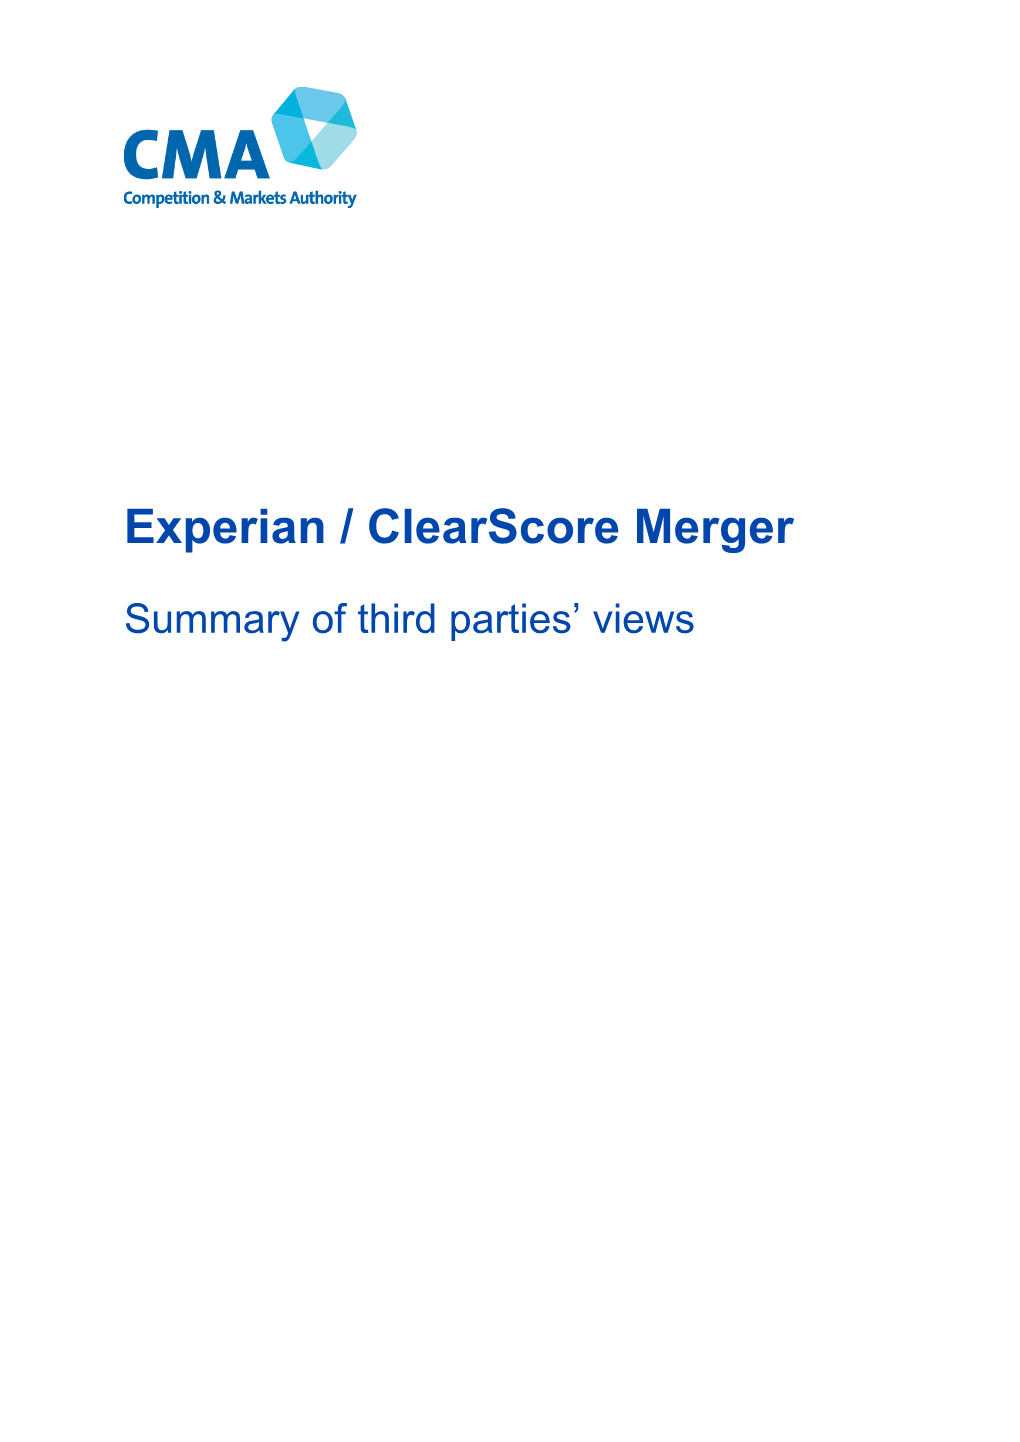 Experian/Clearscore Merger: Summary of Third Parties' Views